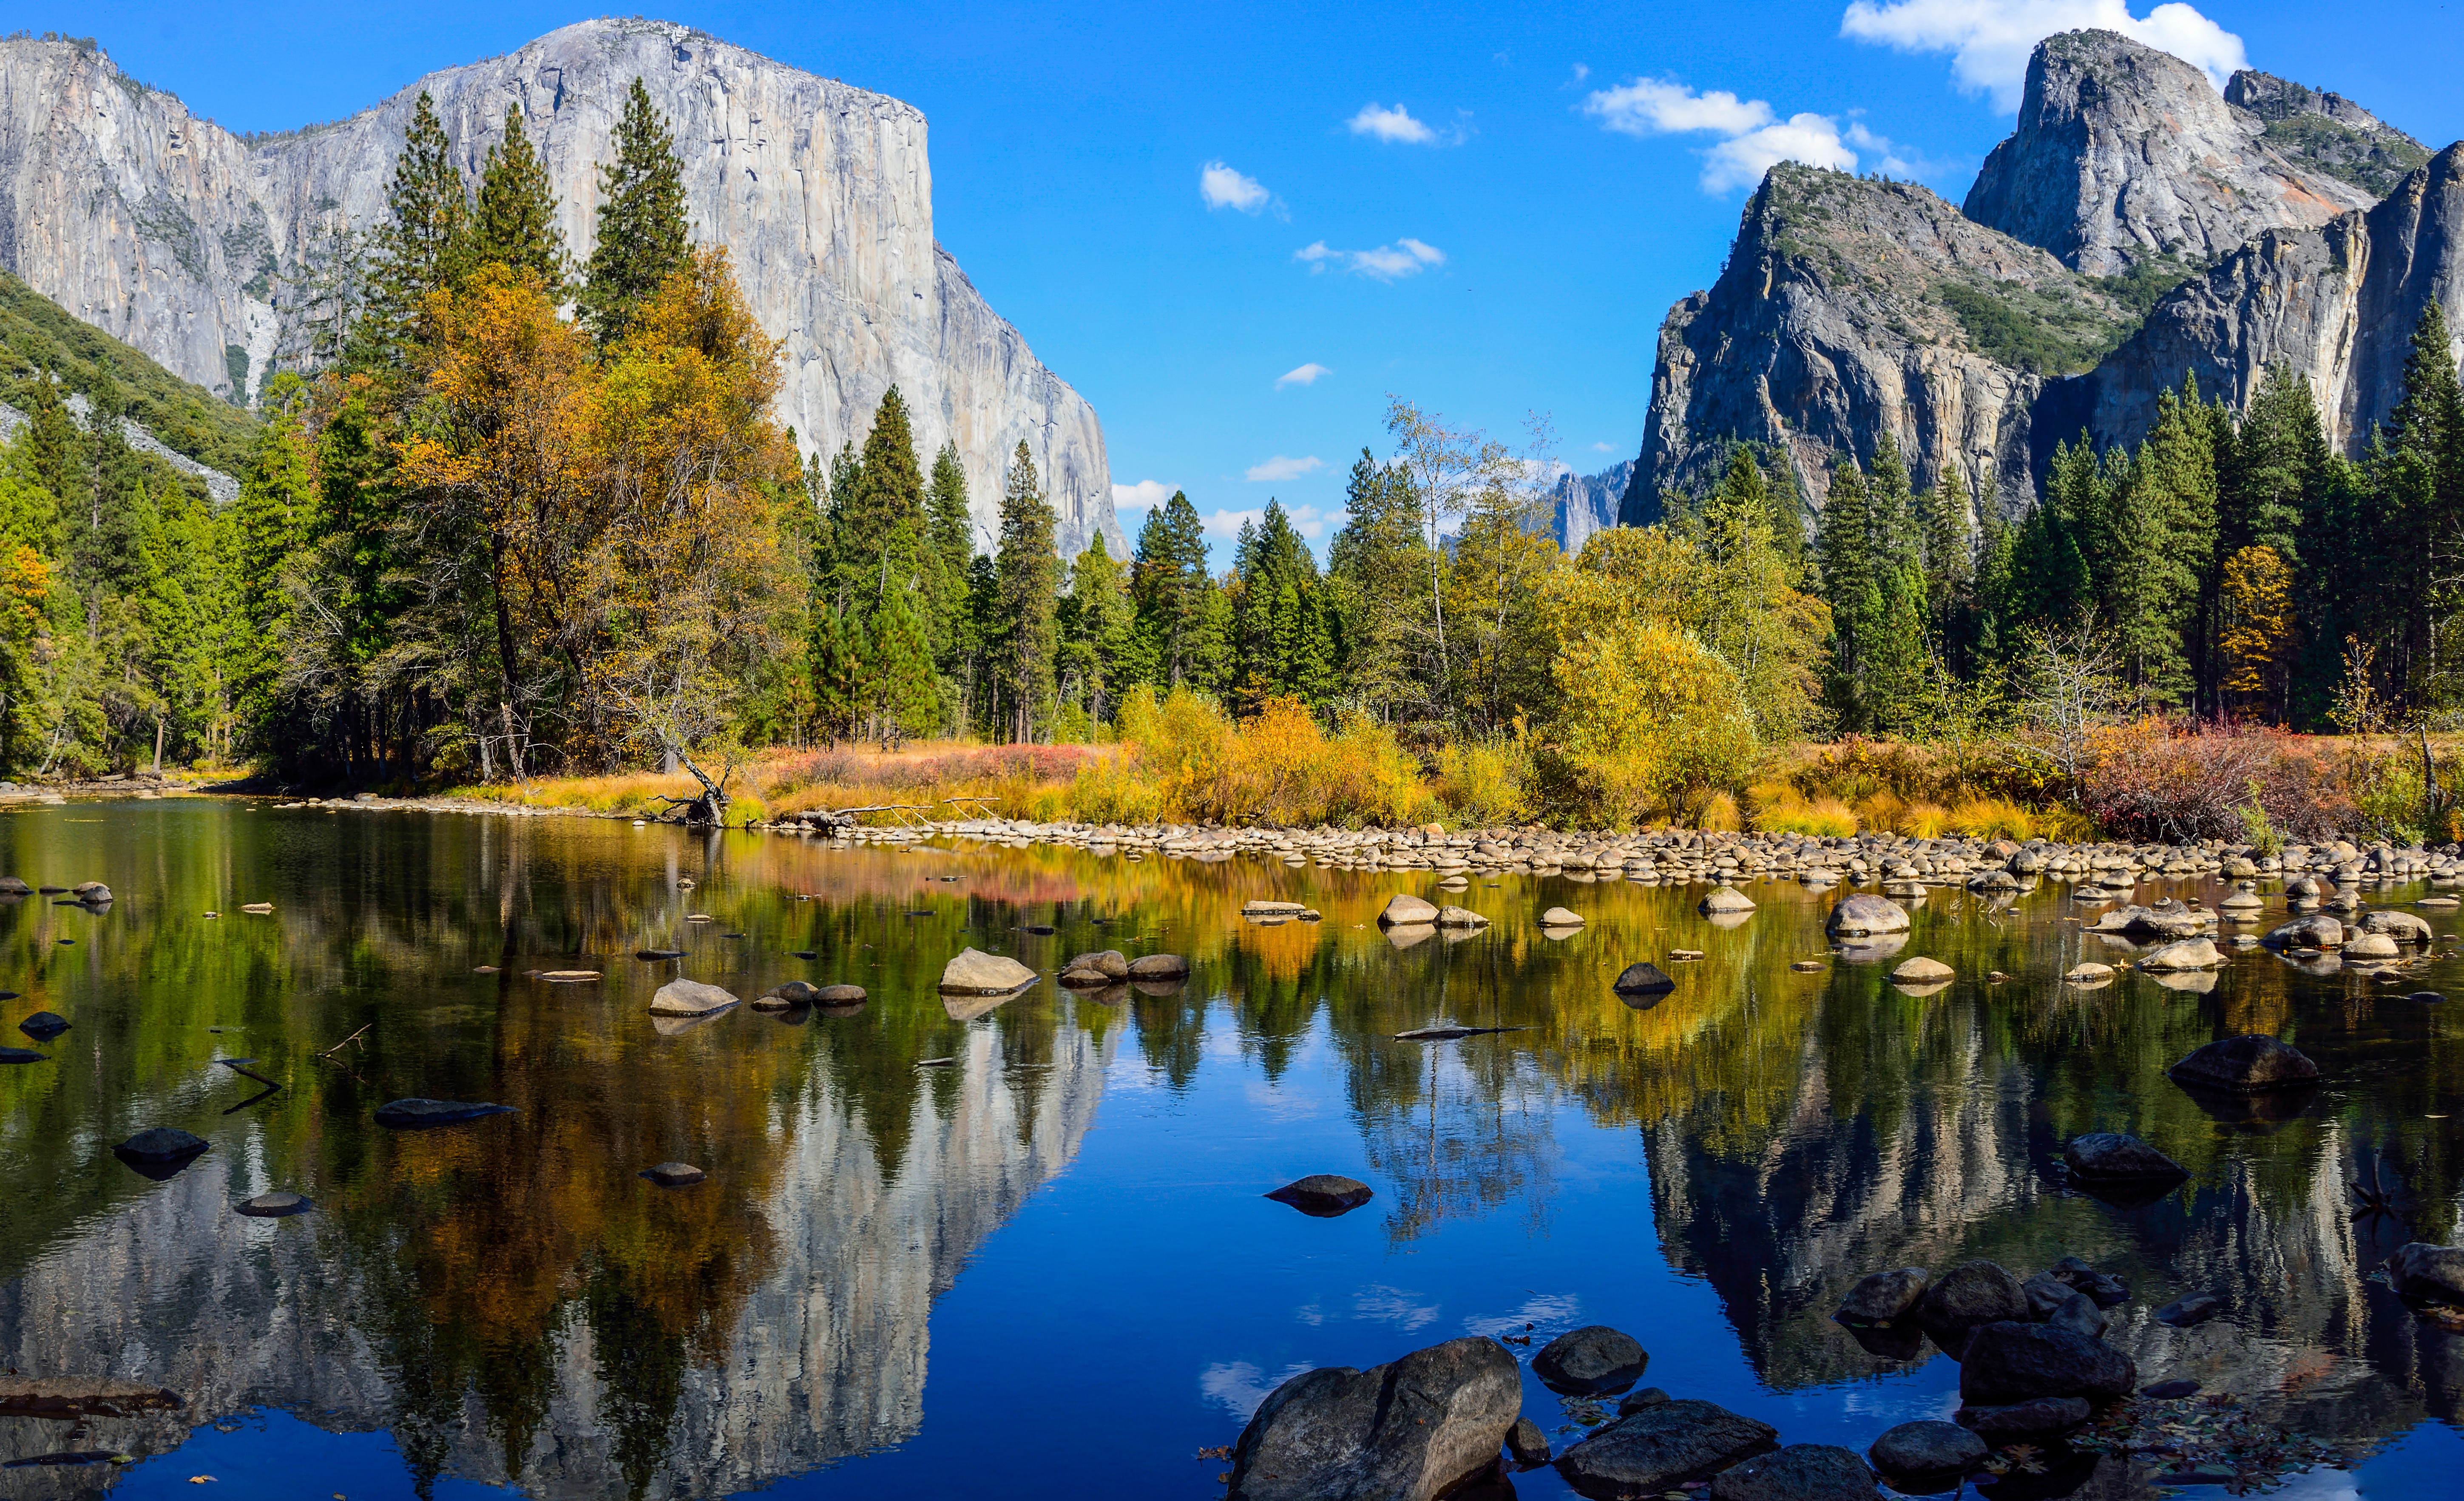 Top Pictures Of Yosemite National Park Backpaco World Explorer